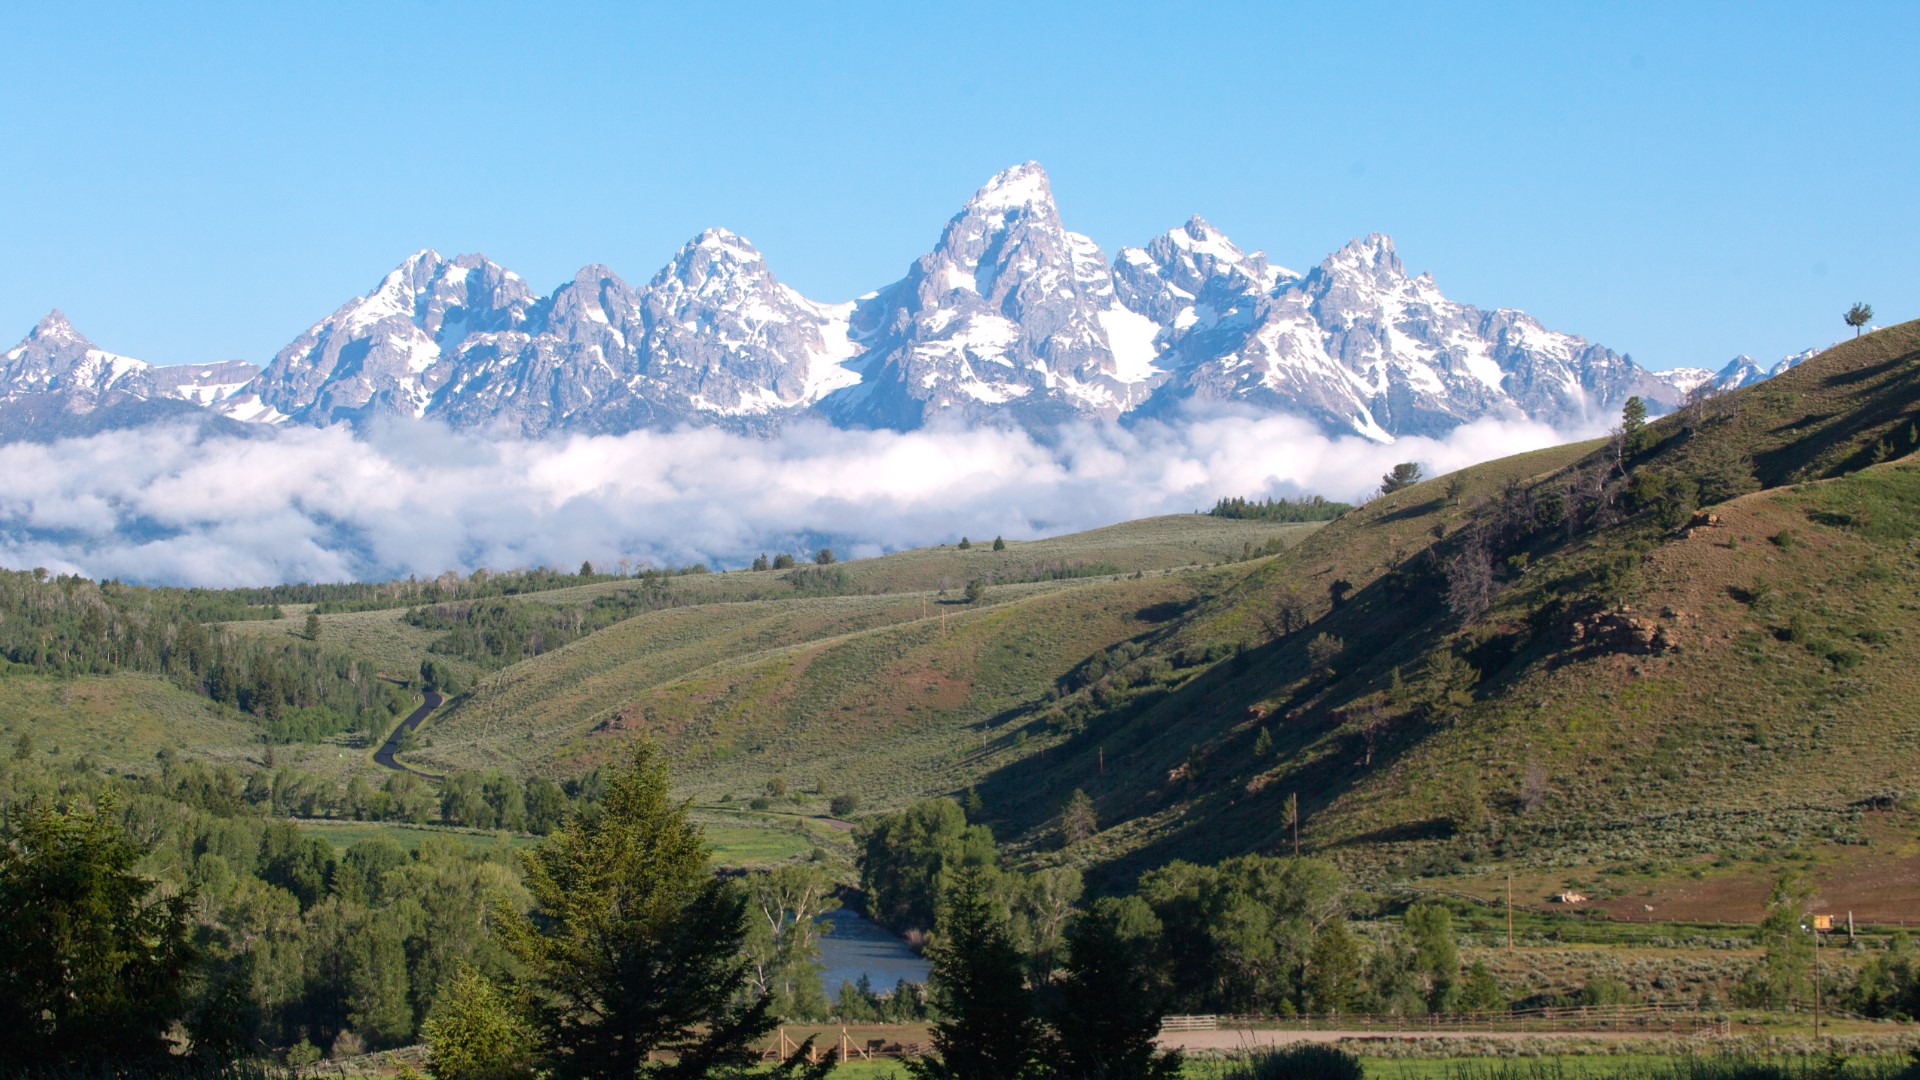 We ask an expert the best places to hike, float and drink a beer at Grand Teton National Park.